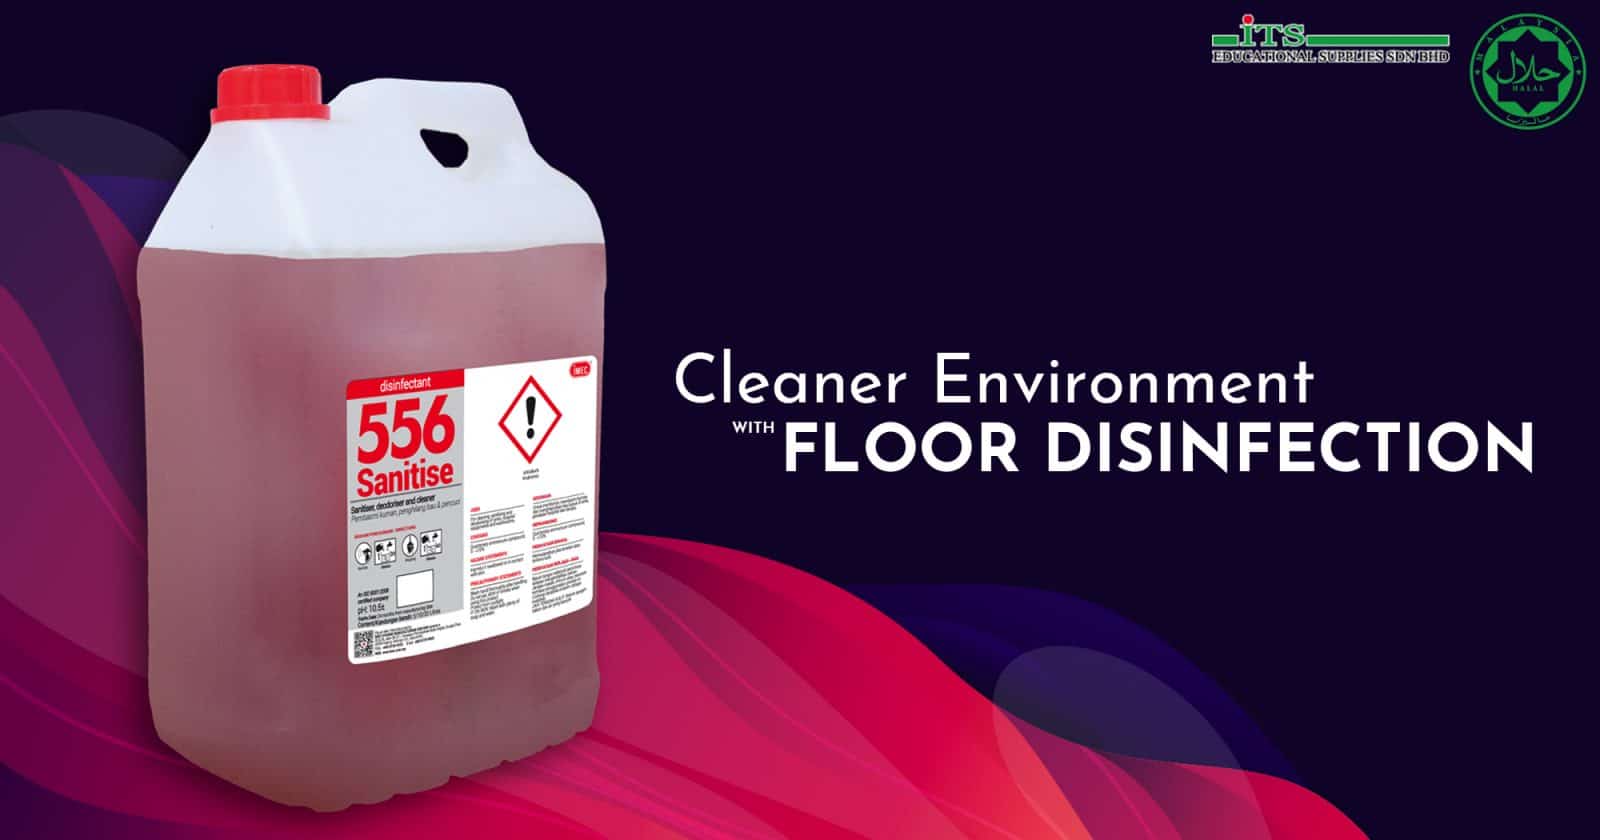 ITSSB-Cleaner Environment with Floor Disinfection IMEC 556 Sanitise